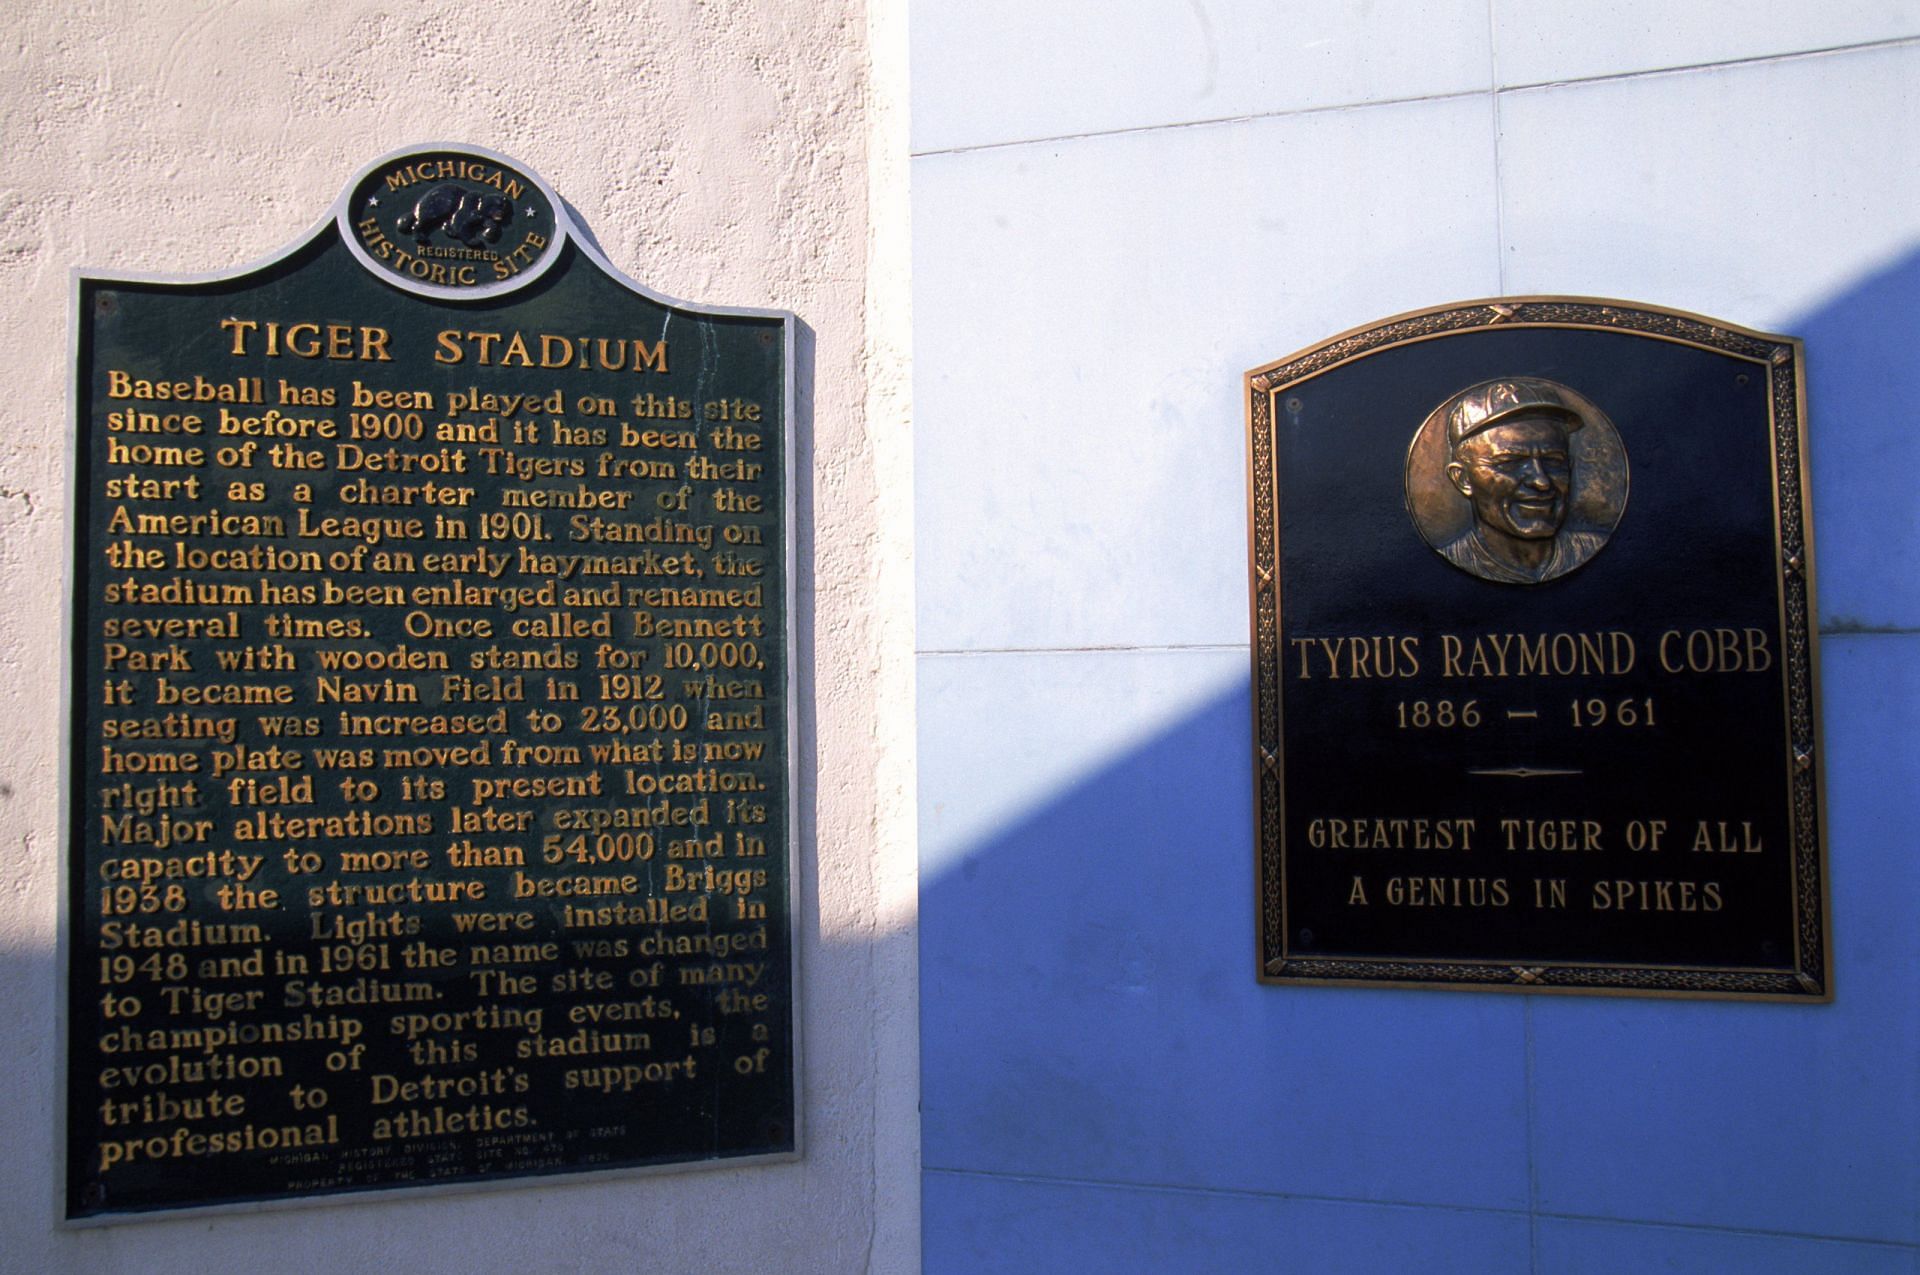 A view of the Tiger Stadium and Tyrus Raymond Cobb plaques